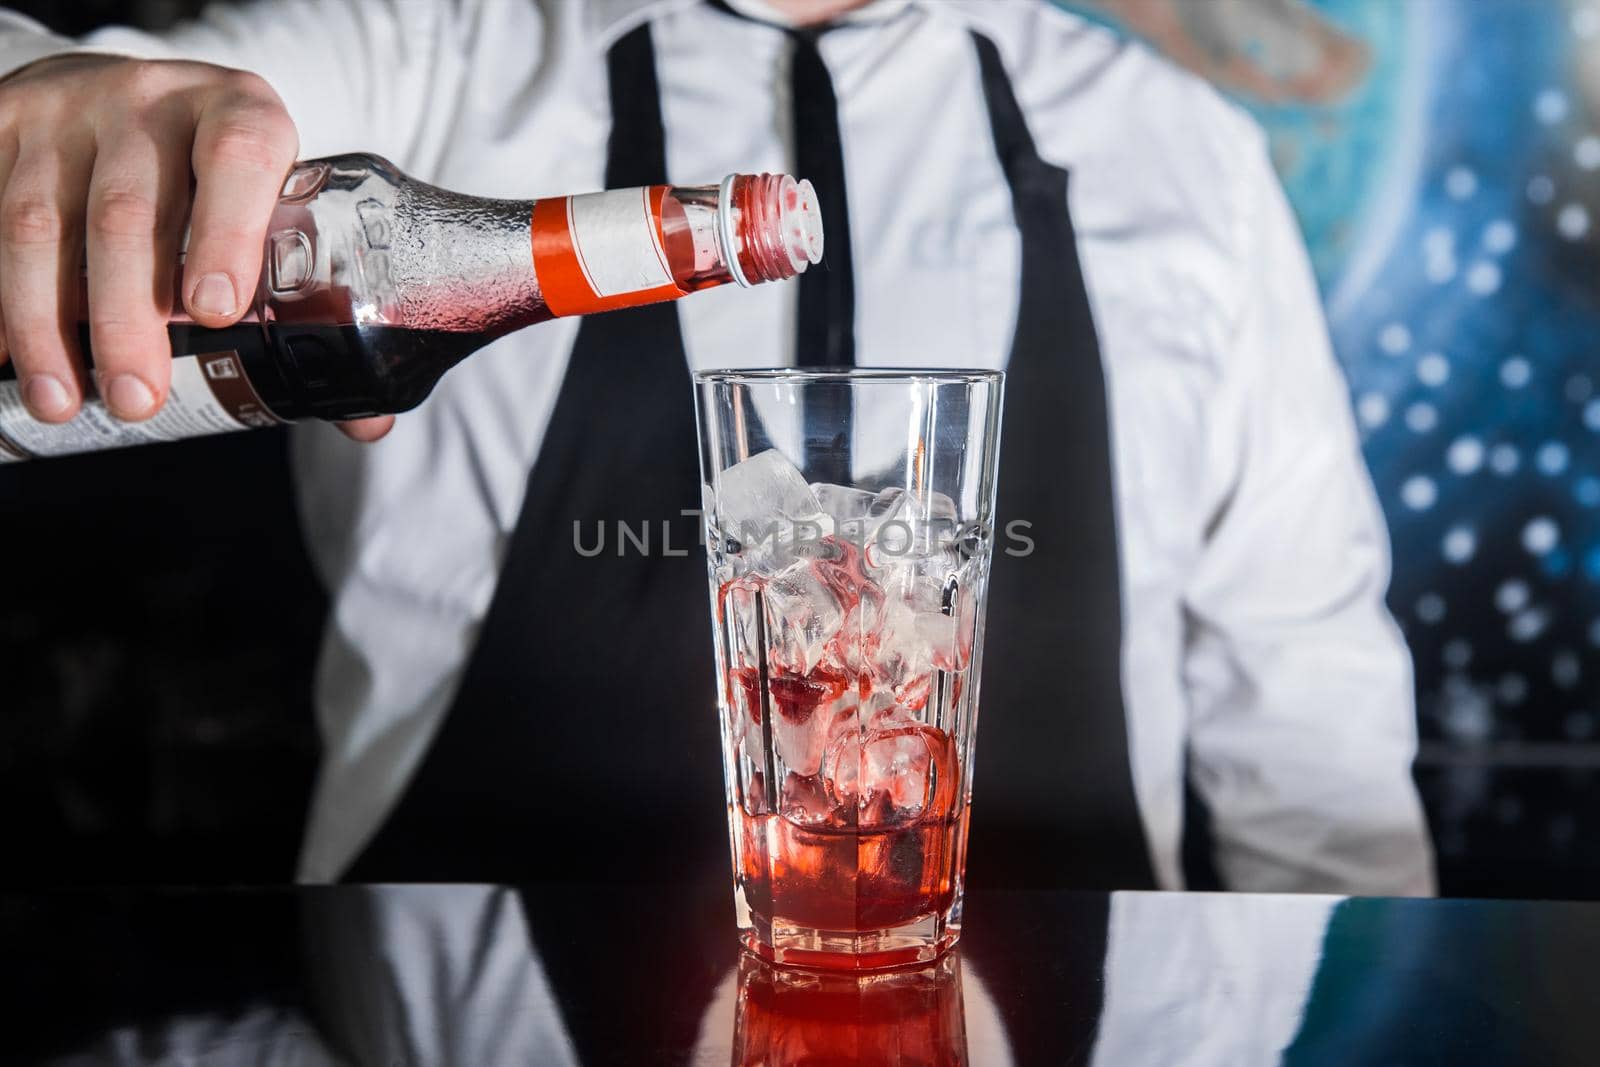 The hand of a professional bartender pours red syrup into a glass of ice cubes. The process of preparing an alcoholic cocktail.